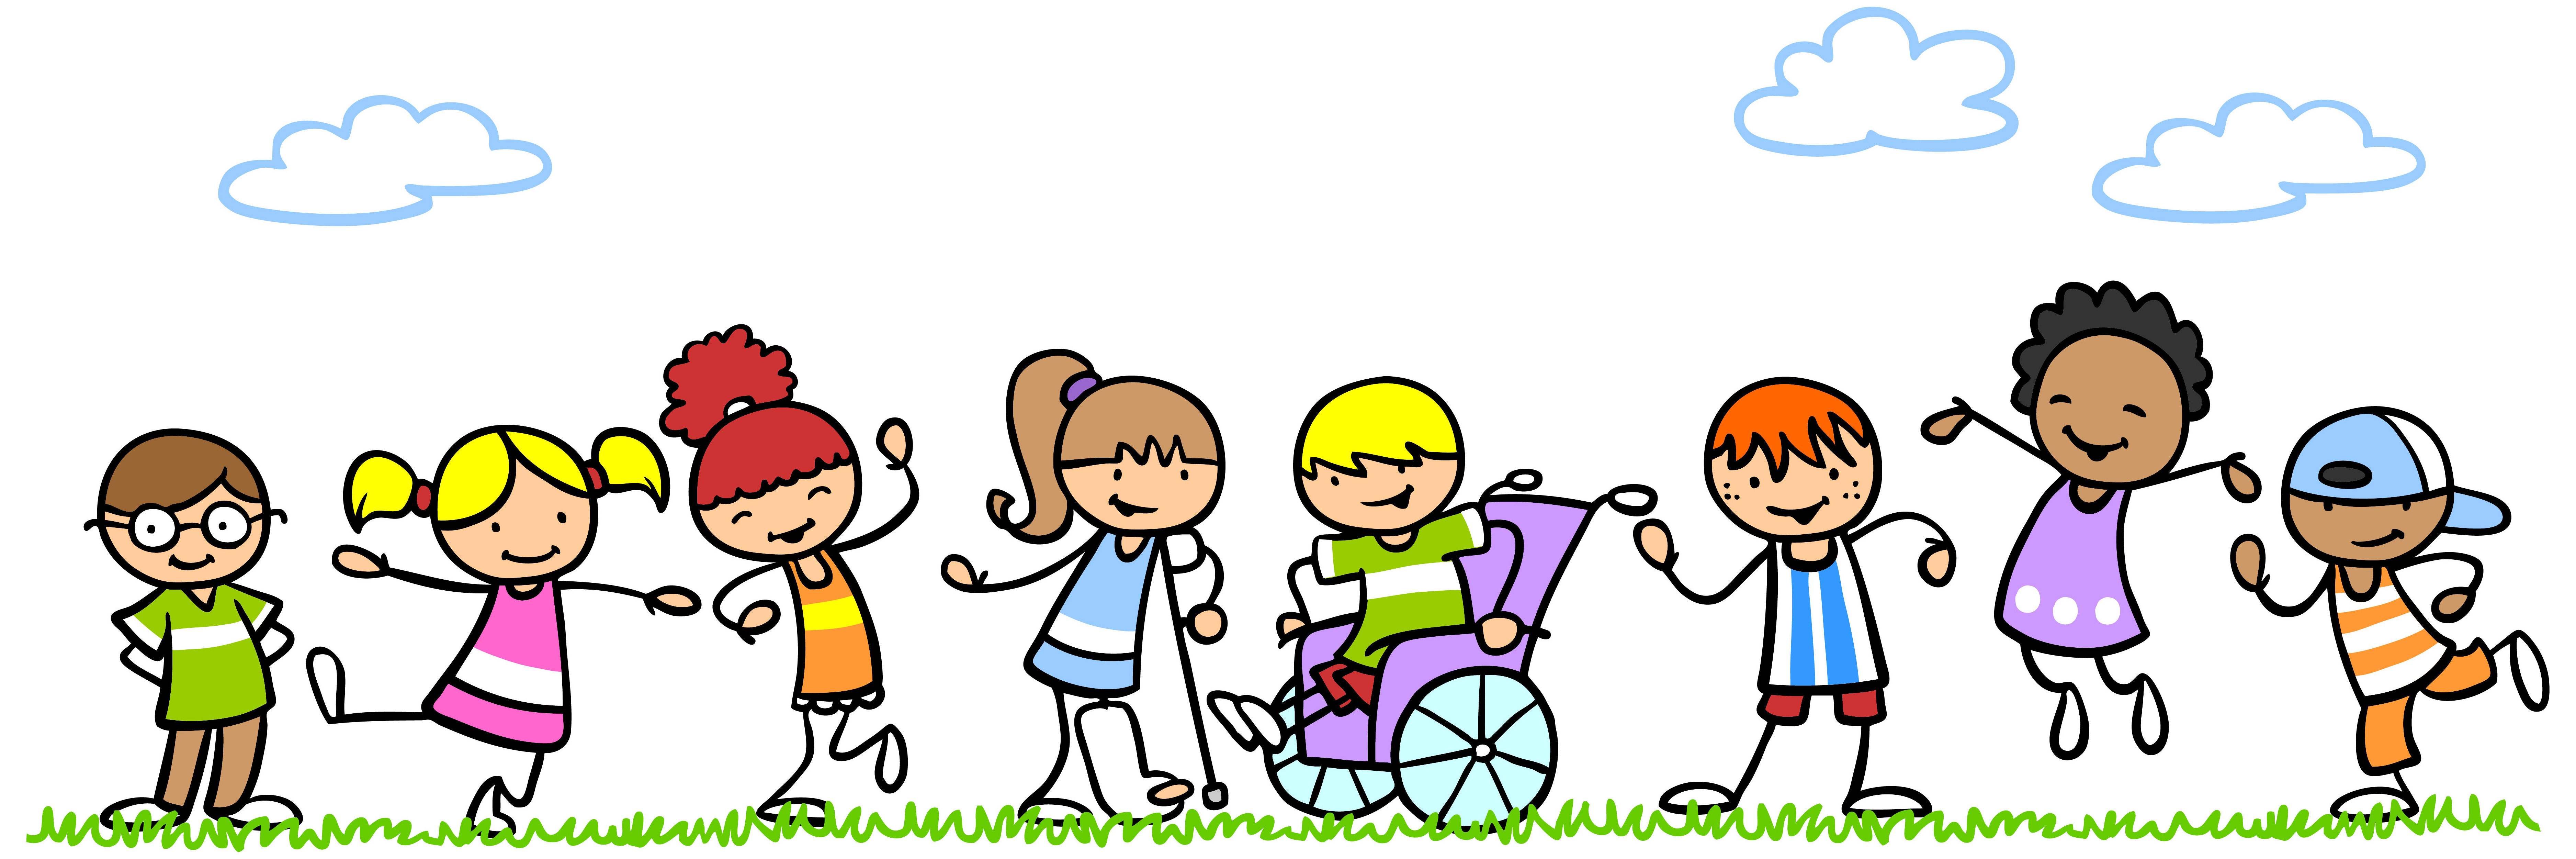 a line of preschool cartoon students having fun outside. The students are different shapes, sizes, color, and disabilities